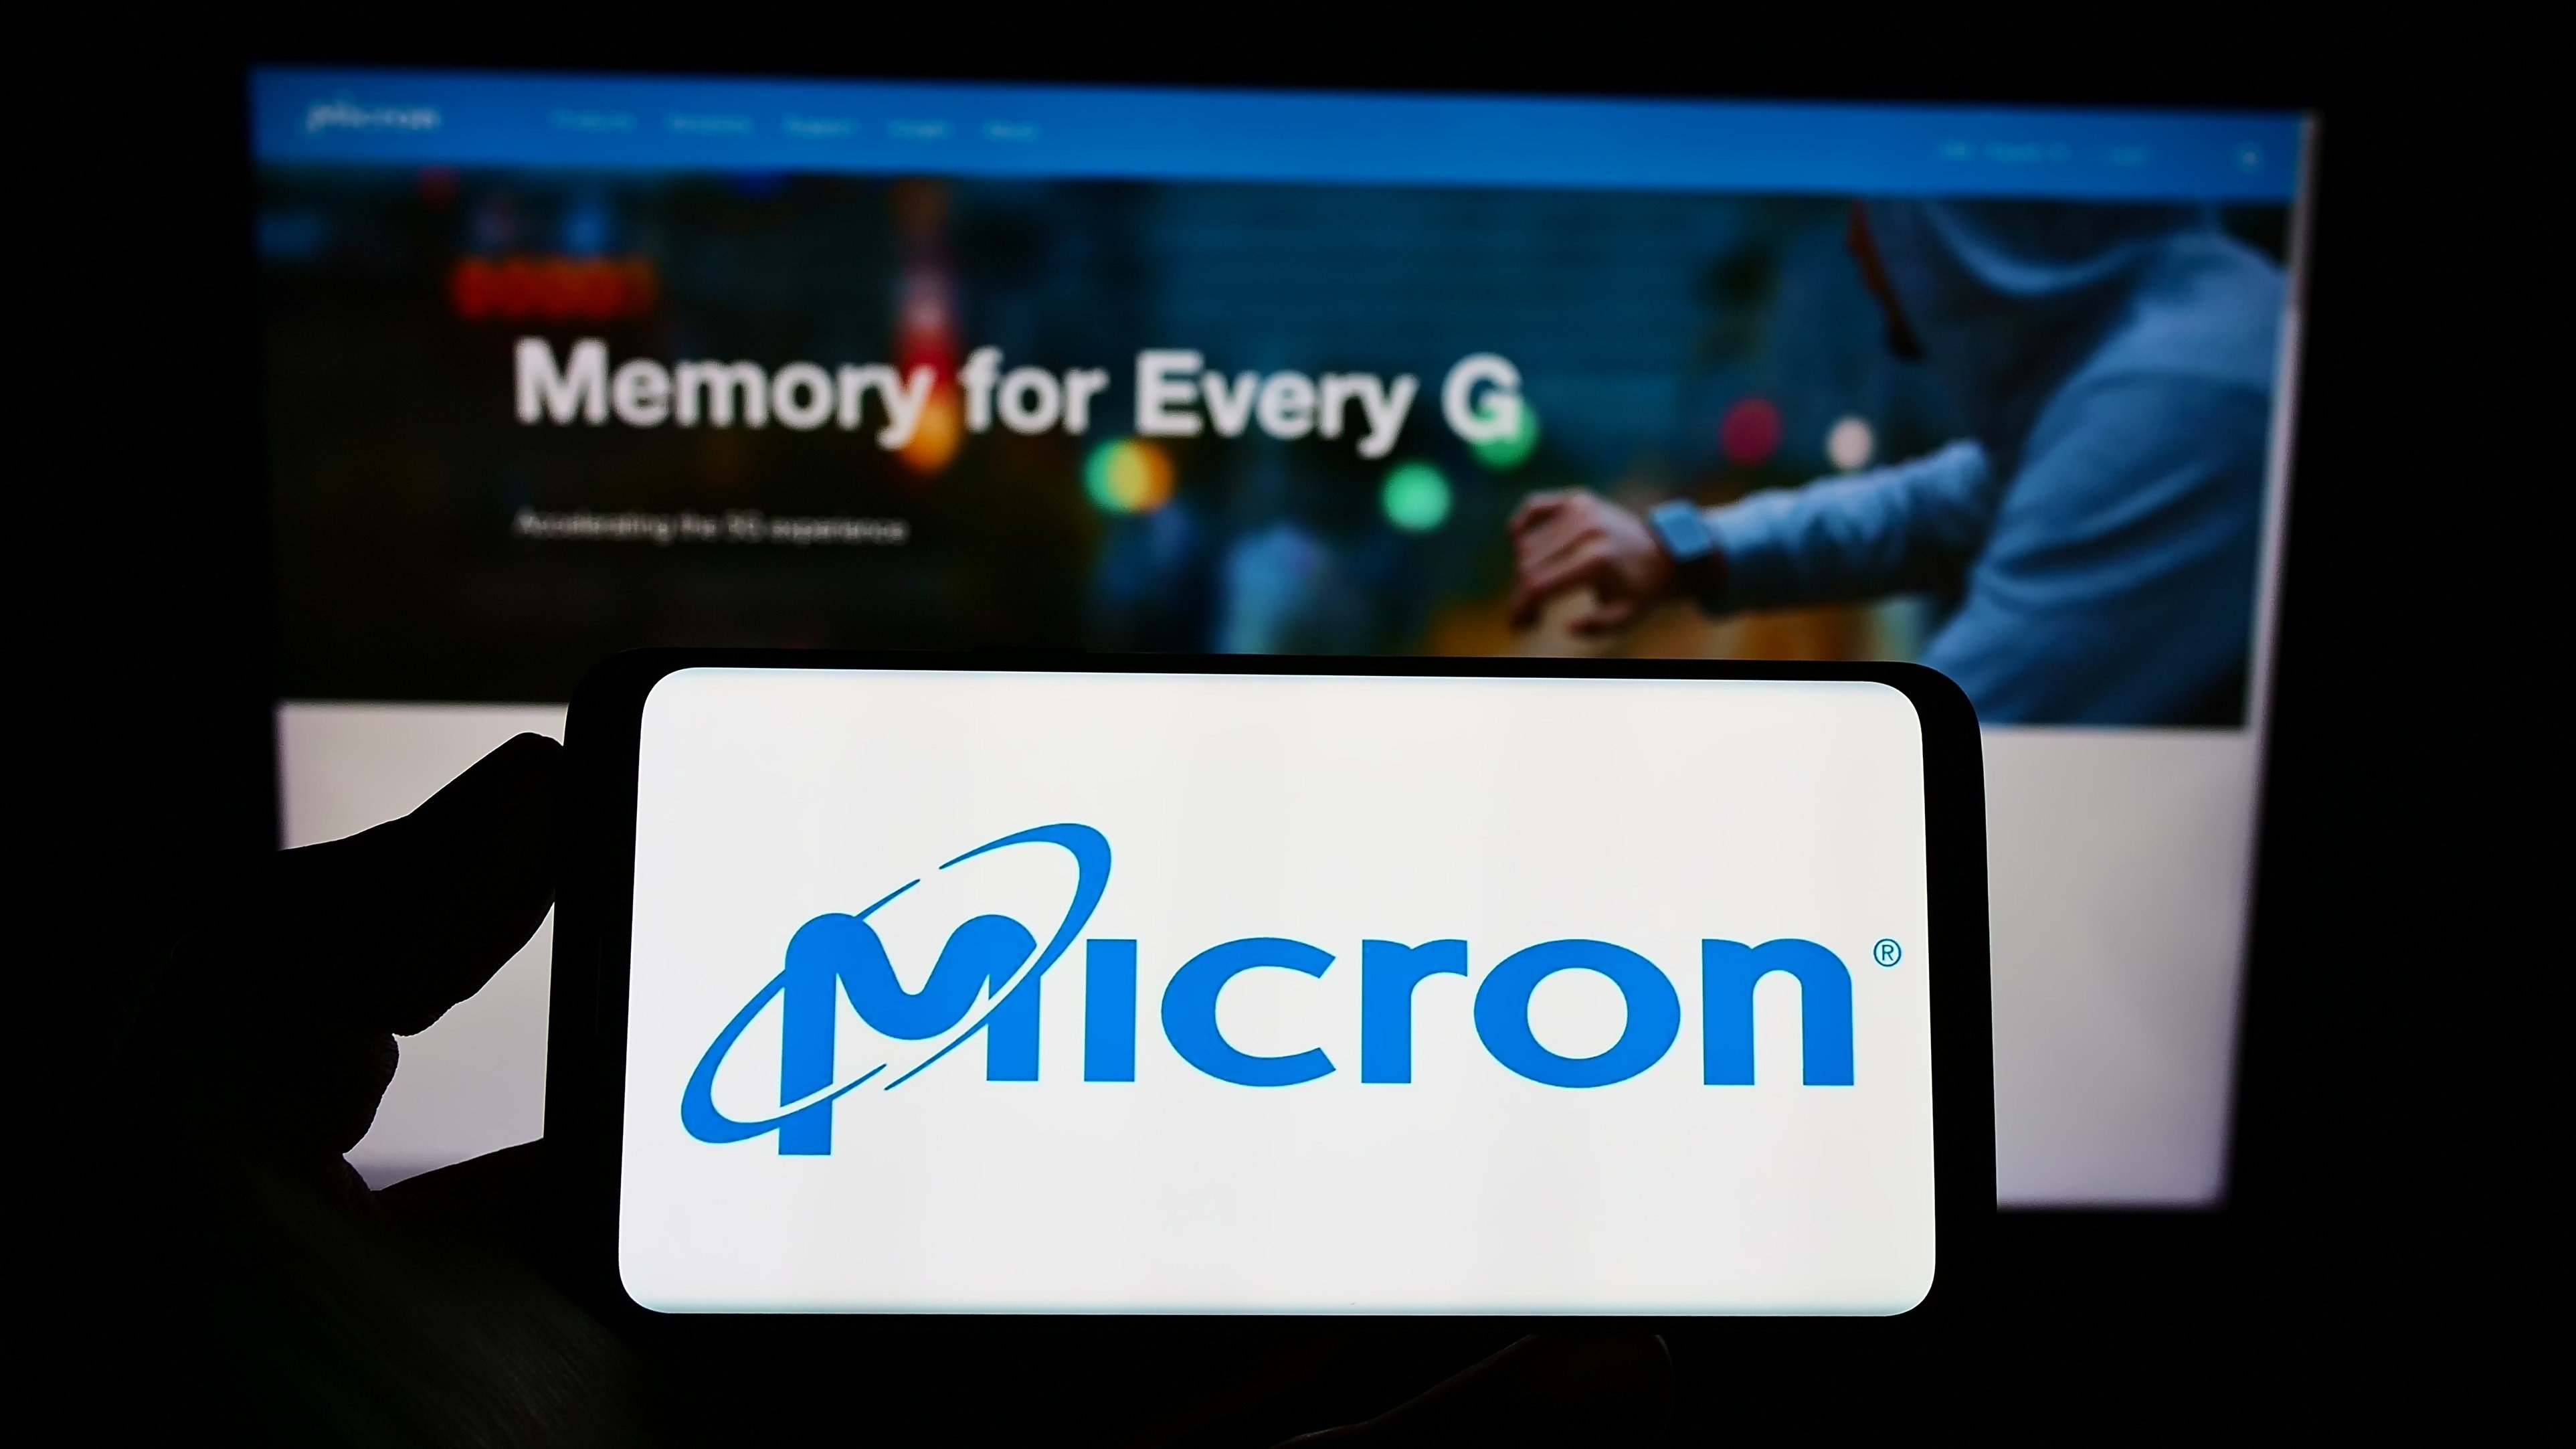 Recent moves by solid-state driver maker Memblaze reflect how Beijing’s actions against Micron could impact some local companies. Photo: Shutterstock